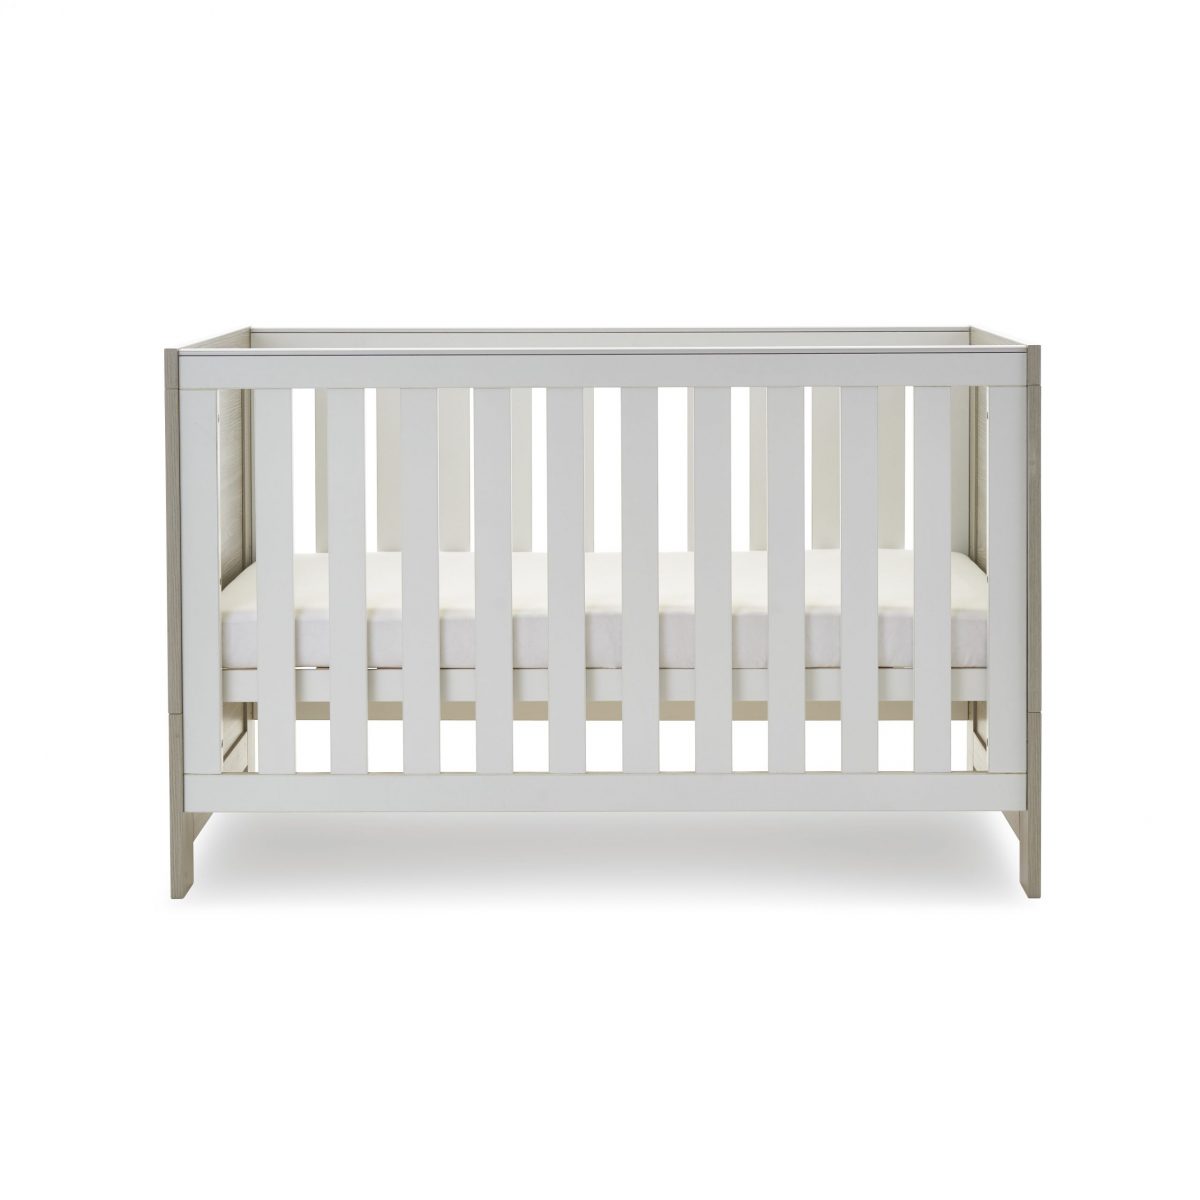 Obaby Nika Cot Bed-Grey Wash and White